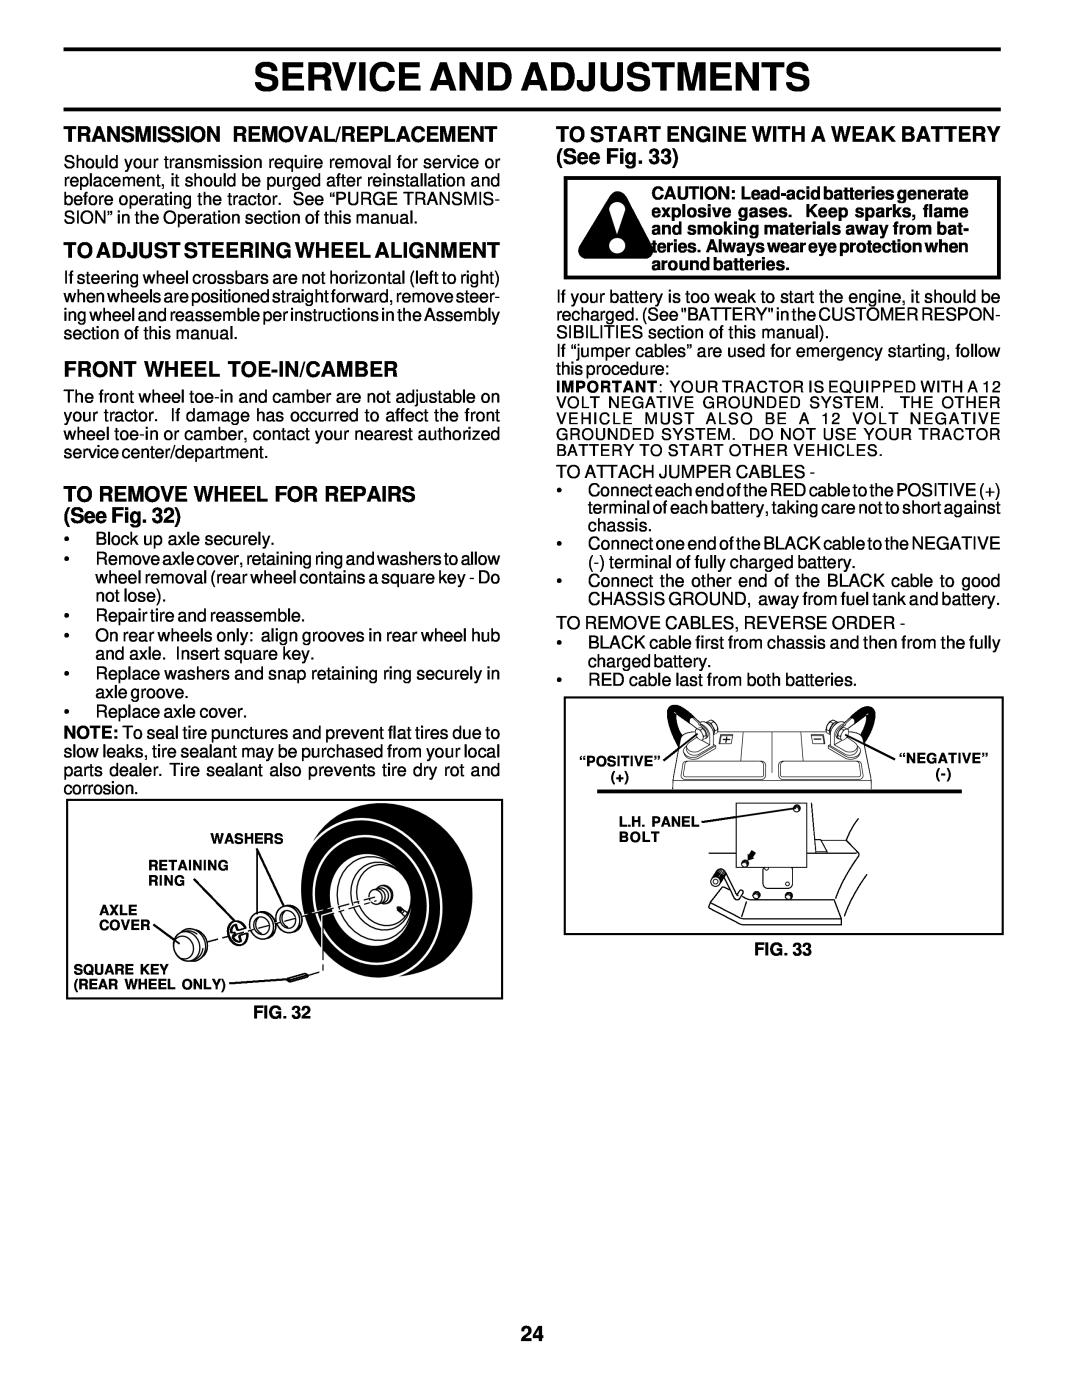 Poulan DPR22H46STB Transmission Removal/Replacement, To Adjust Steering Wheel Alignment, Front Wheel Toe-In/Camber 